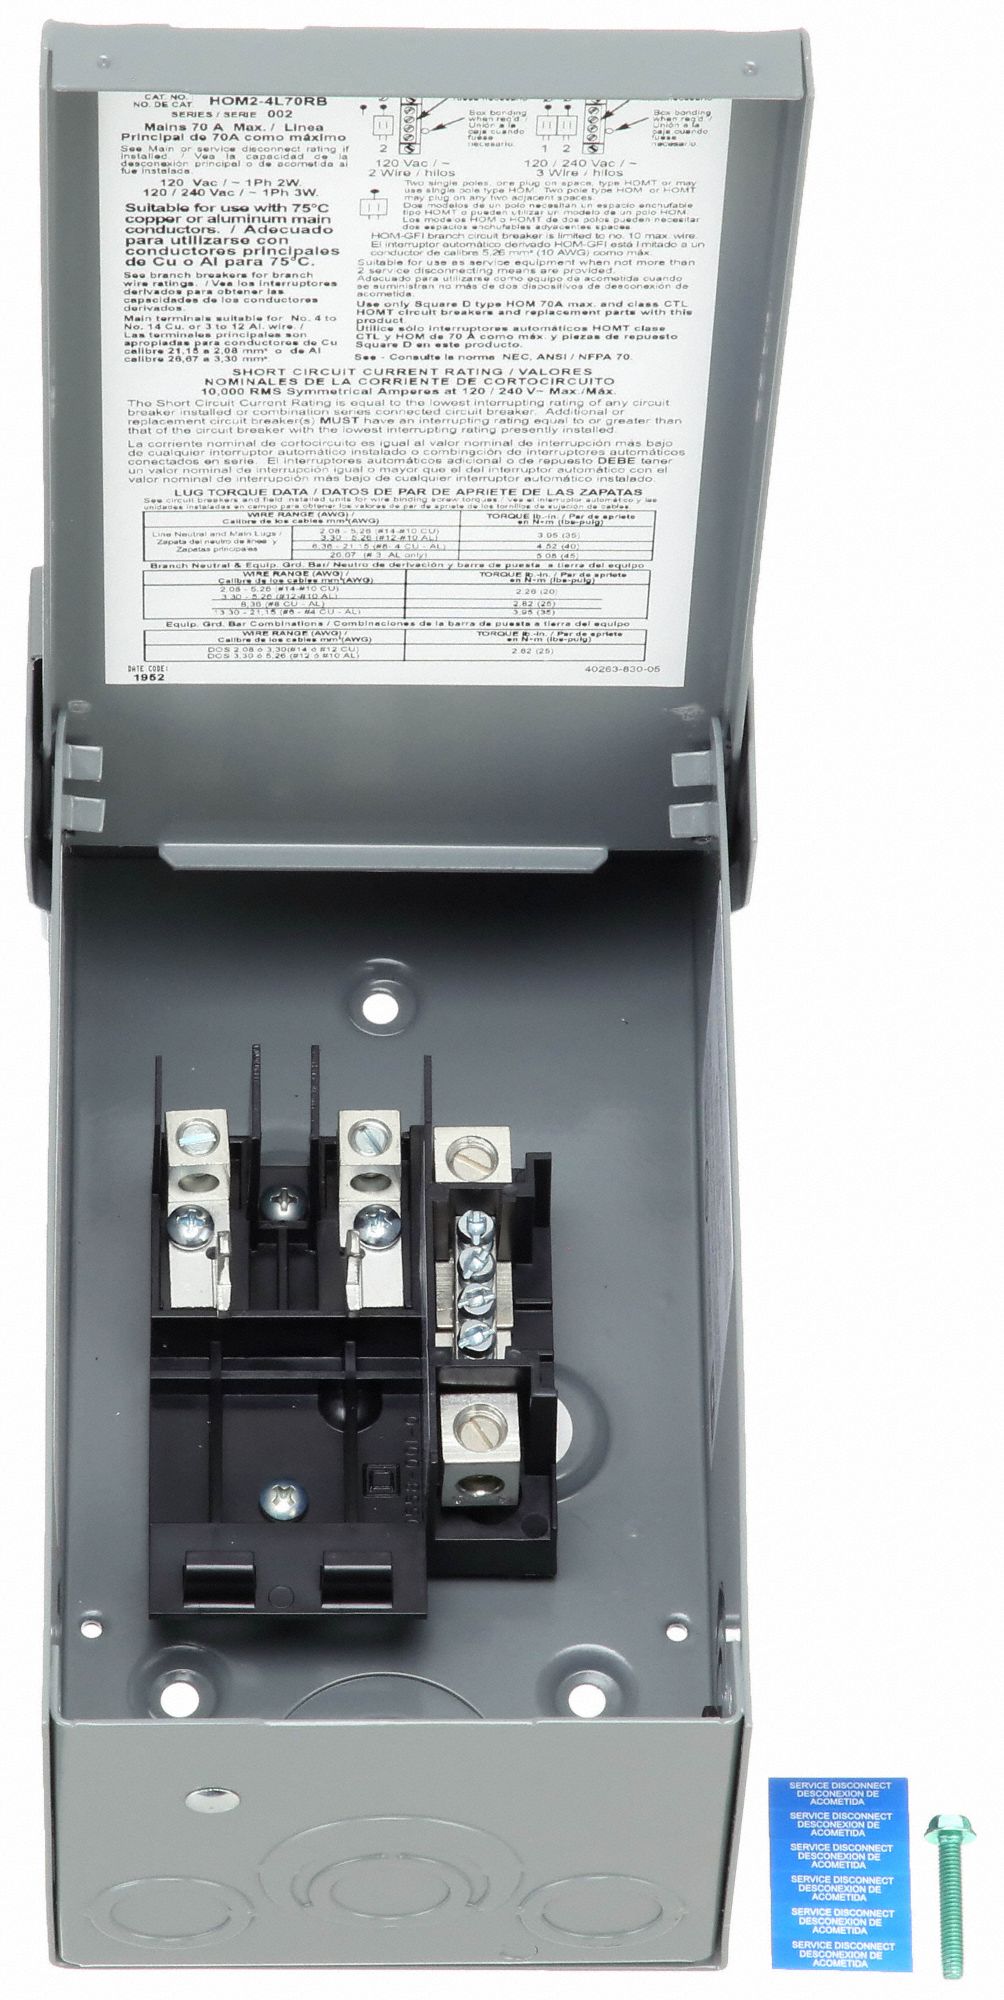 Square D Circuit Breaker Load Center Outdoor 2 Spaces 4 Circuits 70A HOM24L70RB 